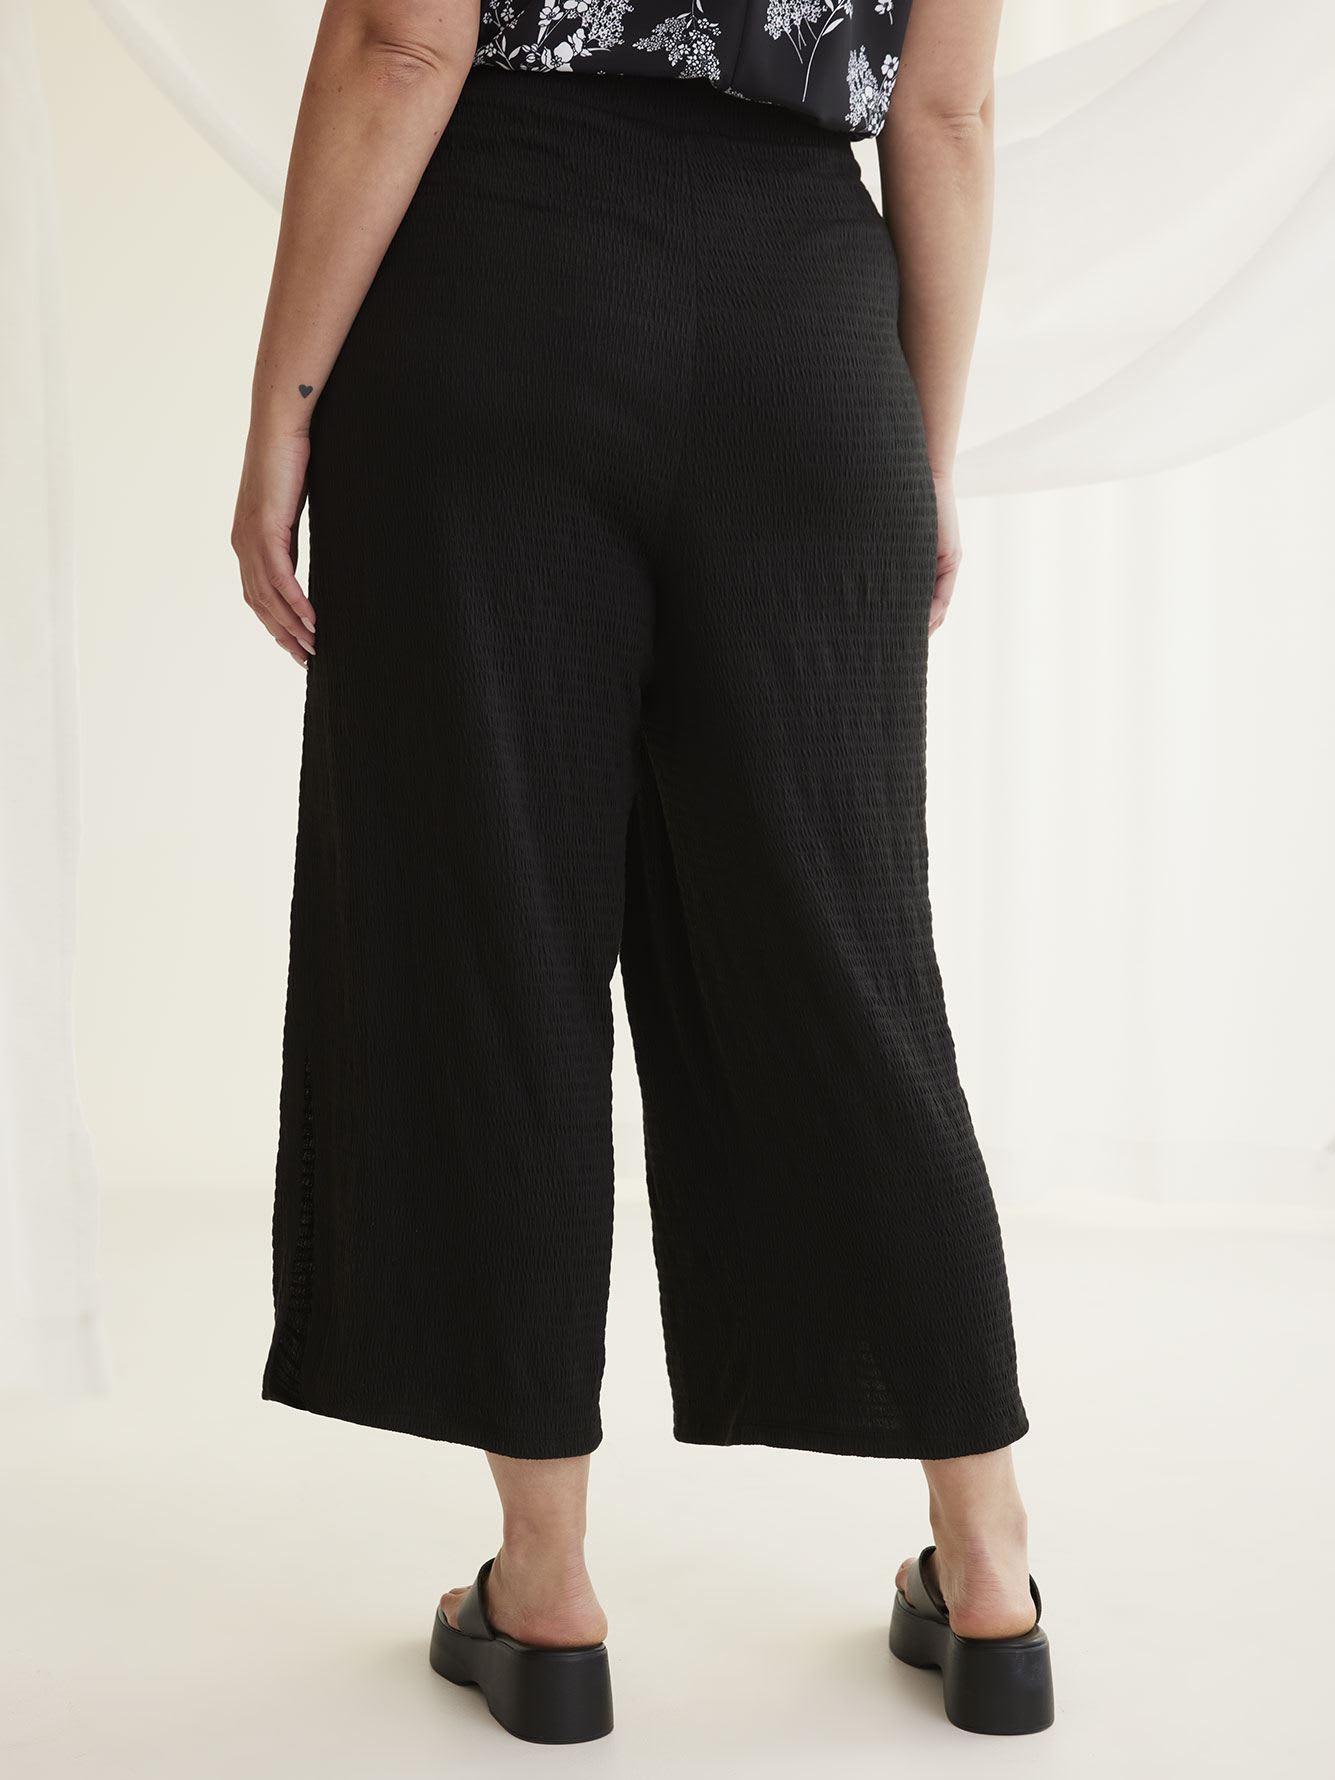 Textured knitted pants - Women